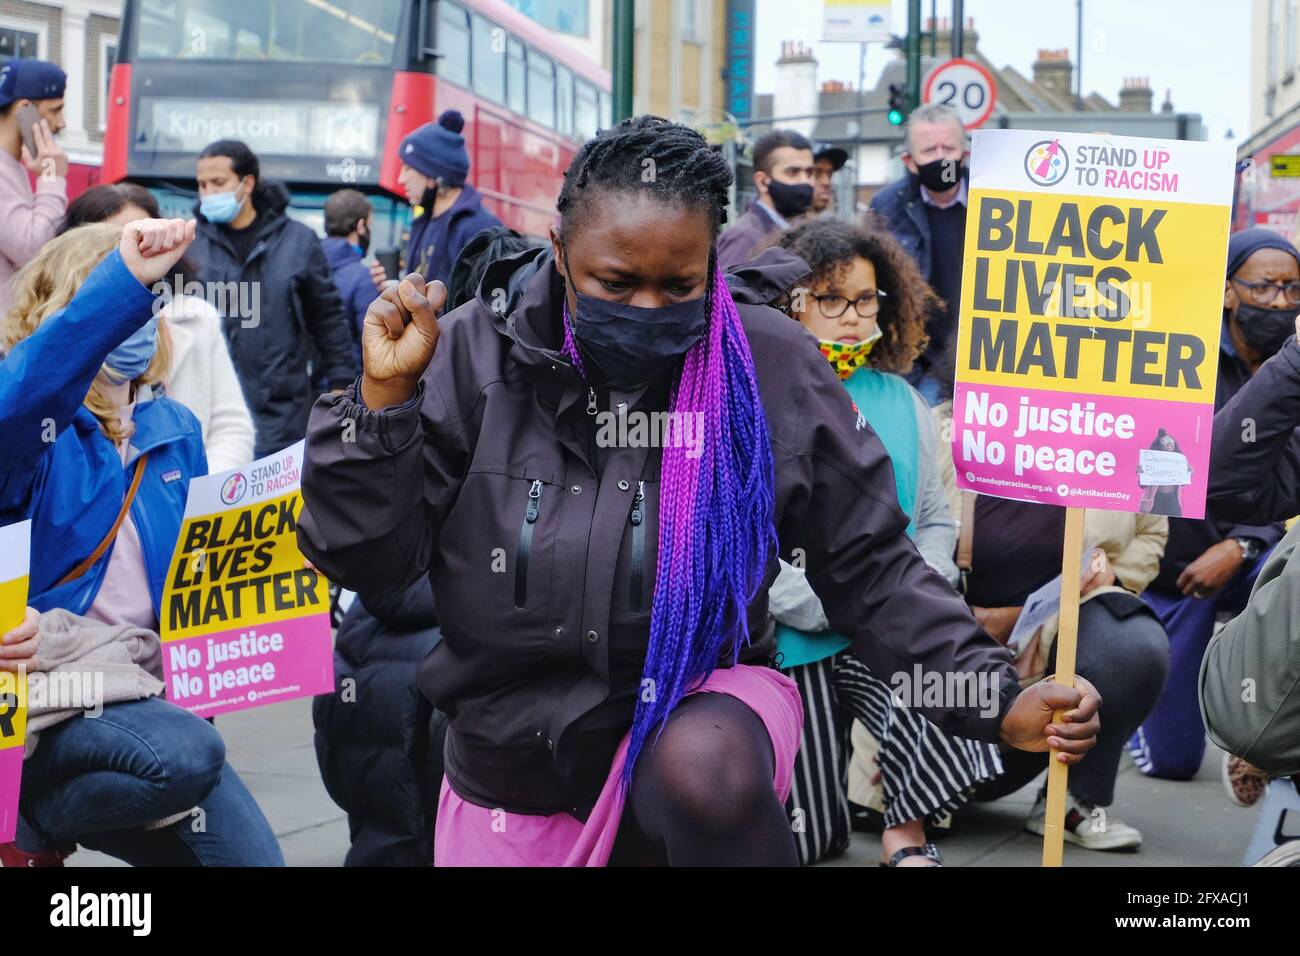 Anti-racism campaigners including local councillors 'take the knee' on the first anniversary of George Floyd's death in Tooting, South London. Stock Photo